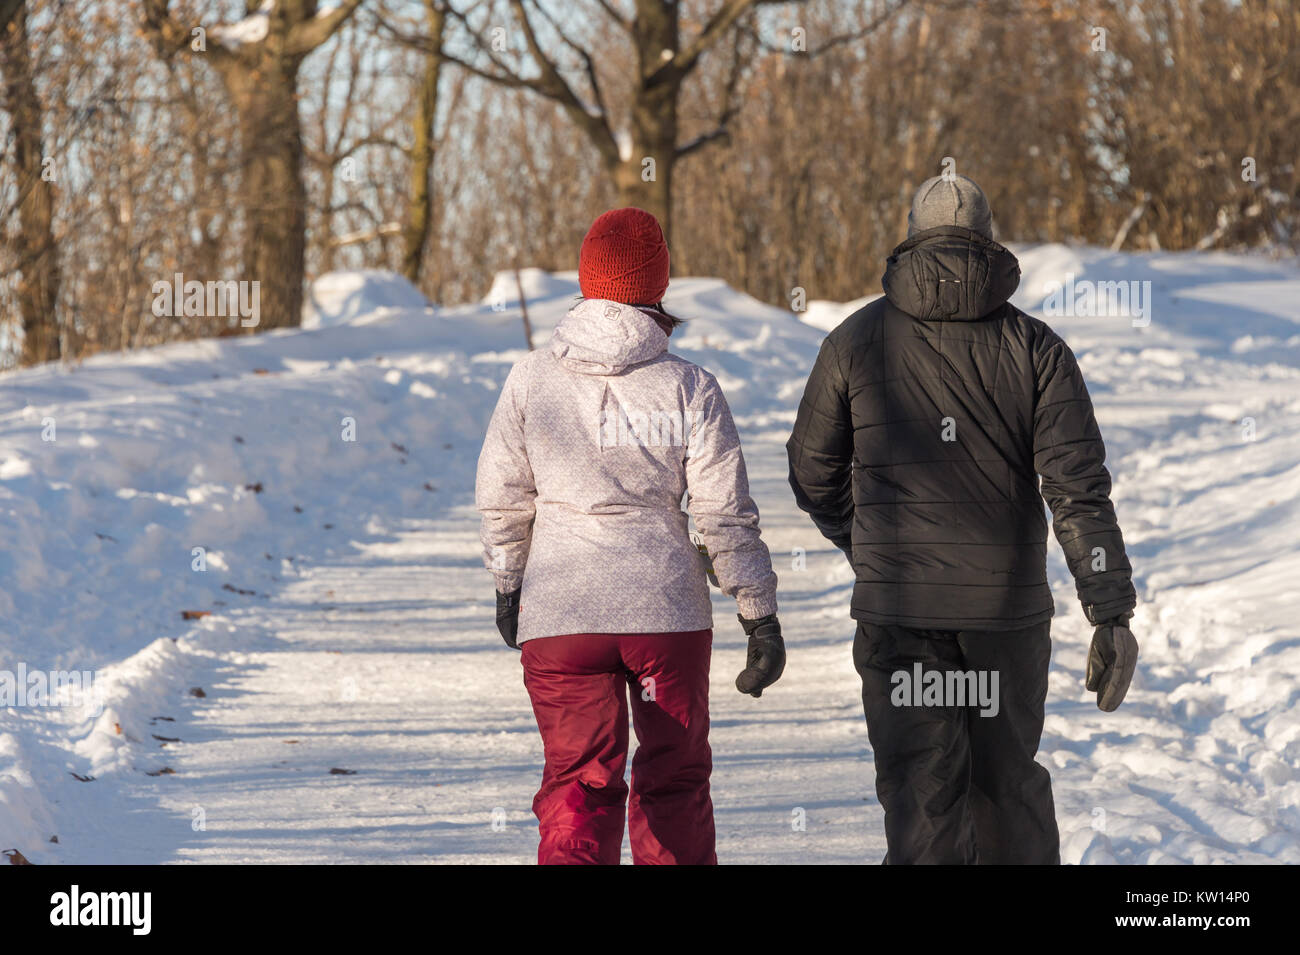 Montreal, CA - 26 December 2017: Couple walking on a snowy trail in Montreal's Mount Royal Park (Parc Du Mont-Royal) Stock Photo